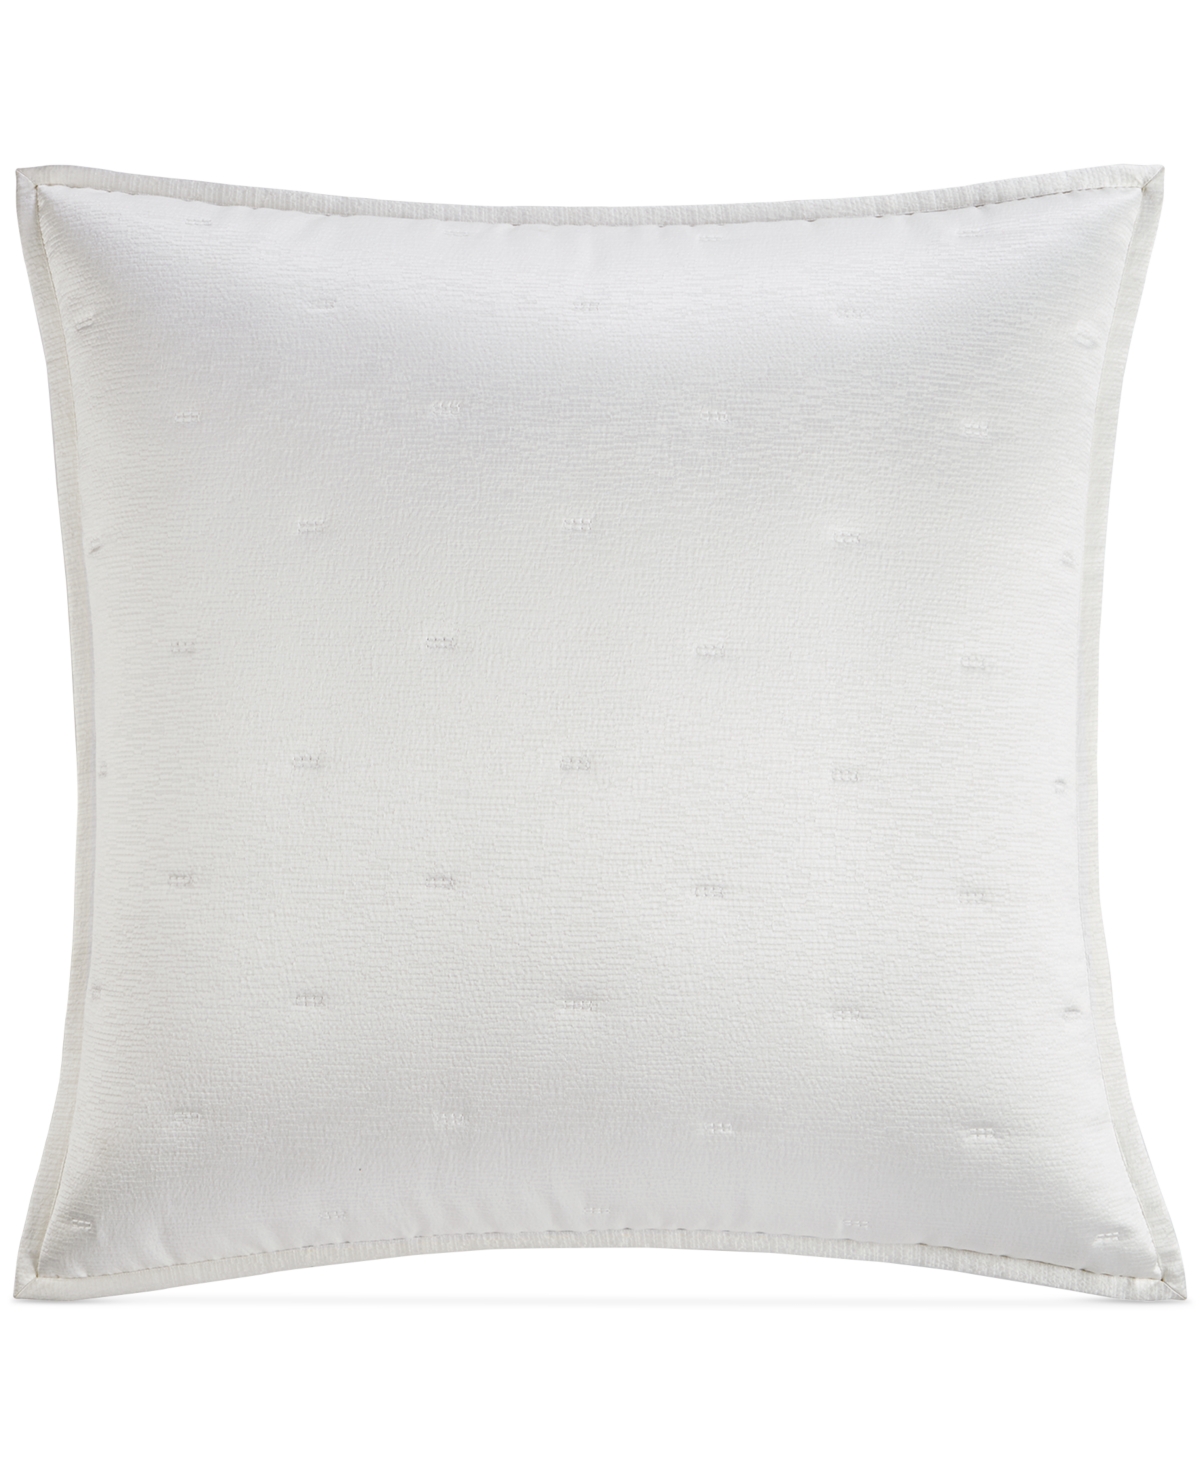 Closeout! Hotel Collection Glint Quilted Sham, European, Created for Macy's - Lake